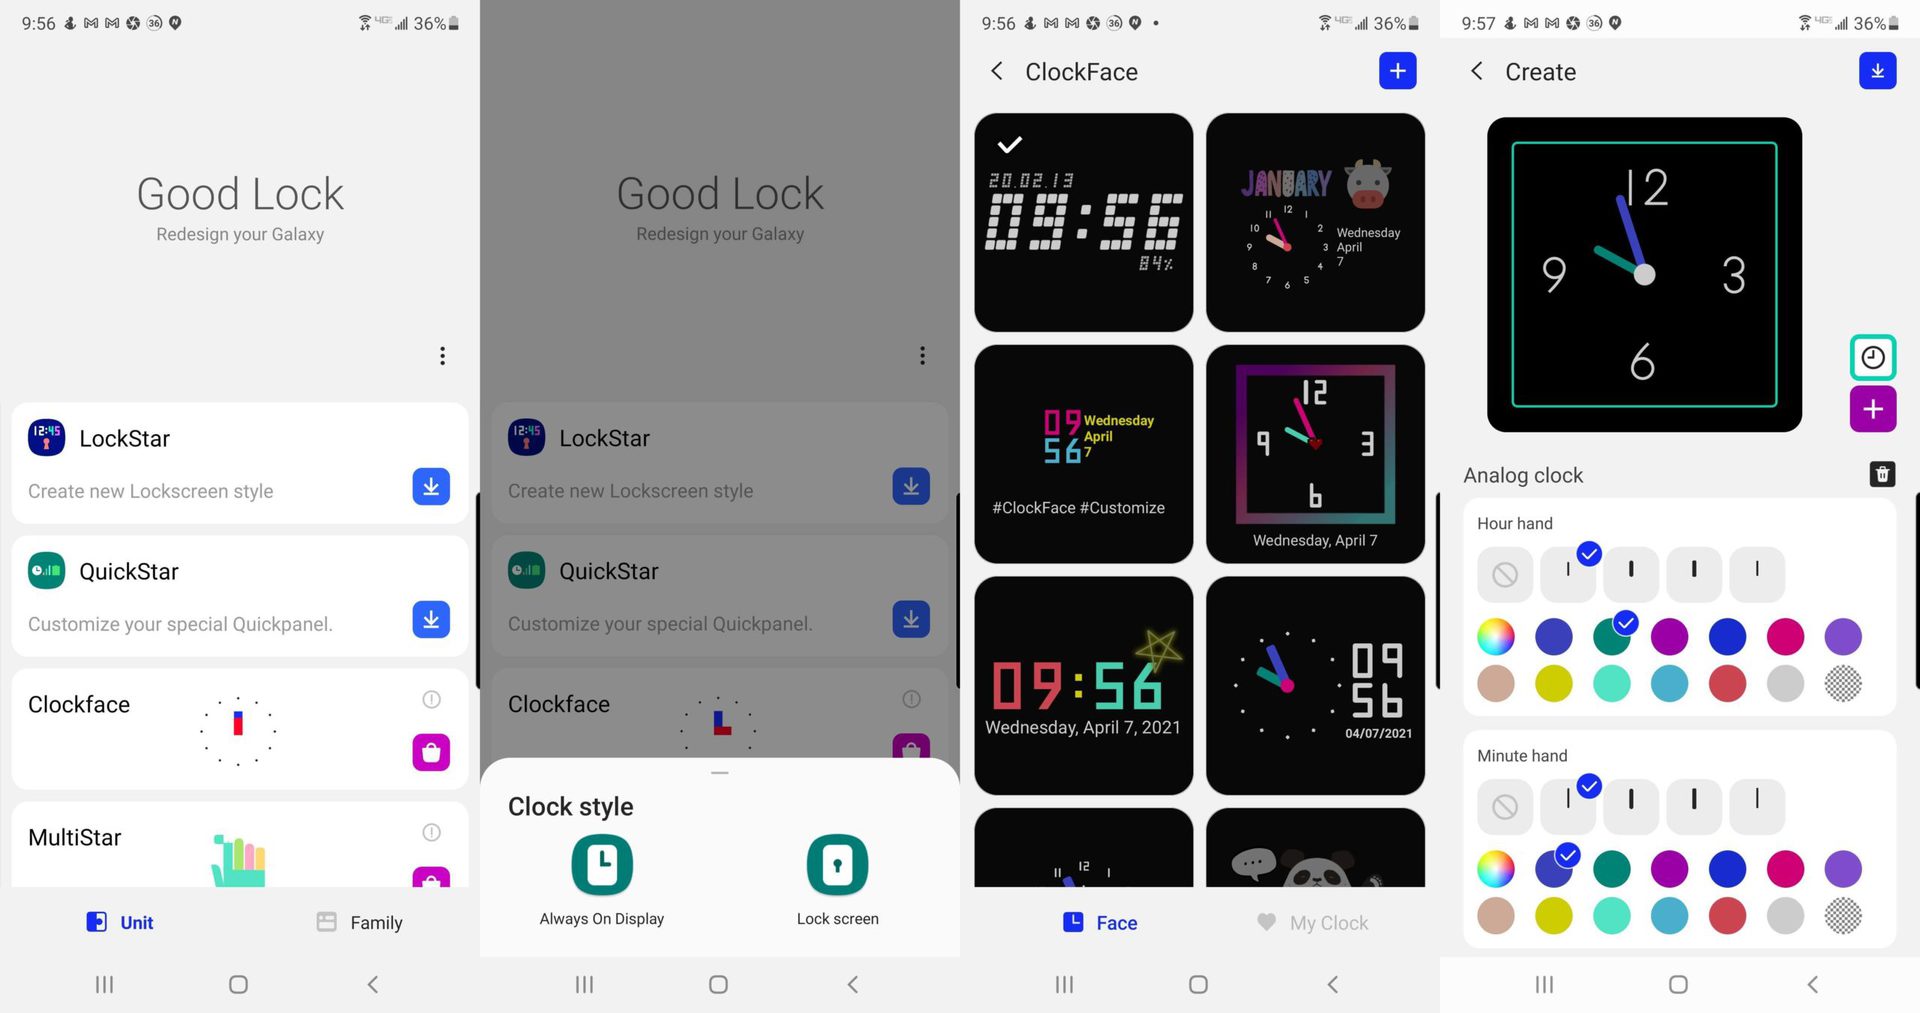 Clockface: Here's how to download the Samsung clock app